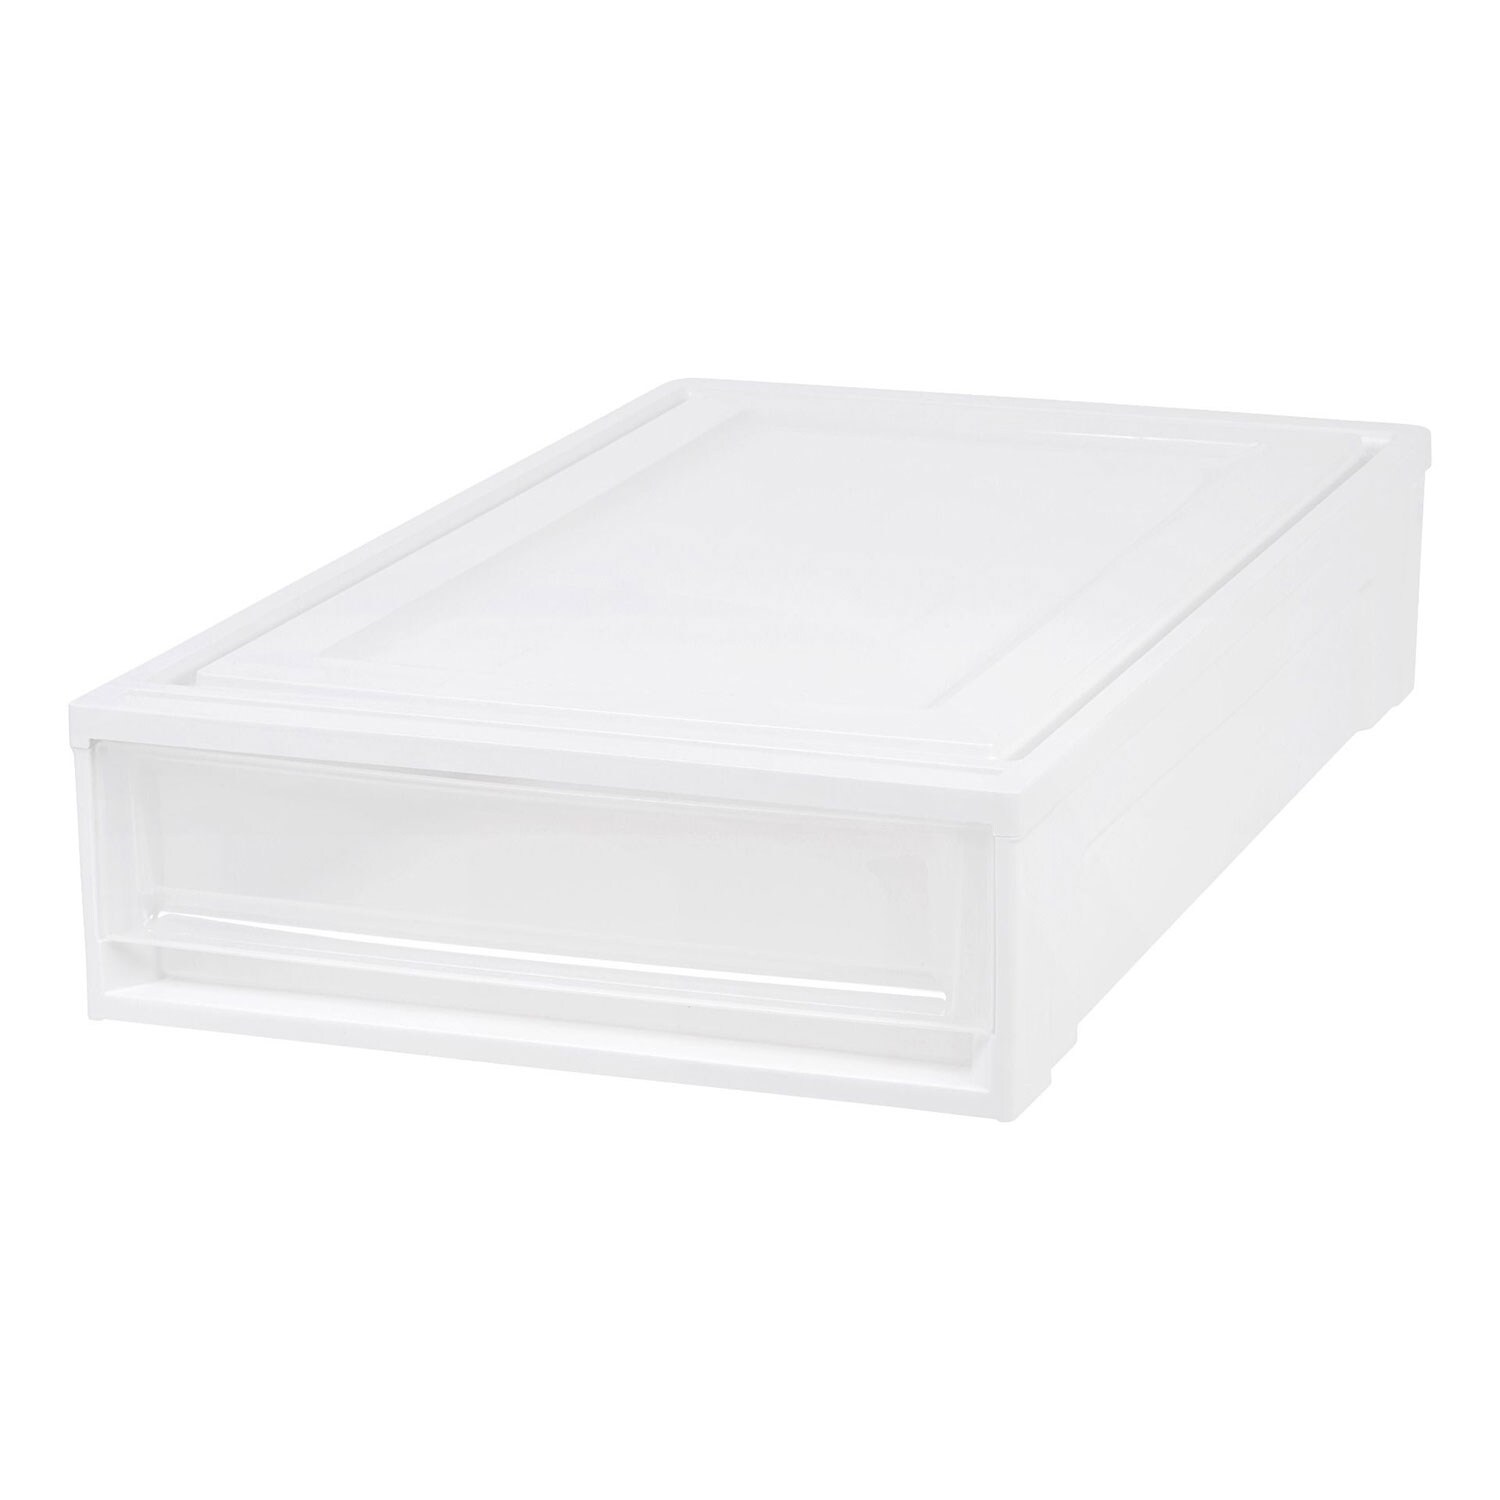 Stacking Drawer 2021 Edition IRIS USA BC-UB Underbed Storage White/Natural Clear 2 Pack 27 Quart